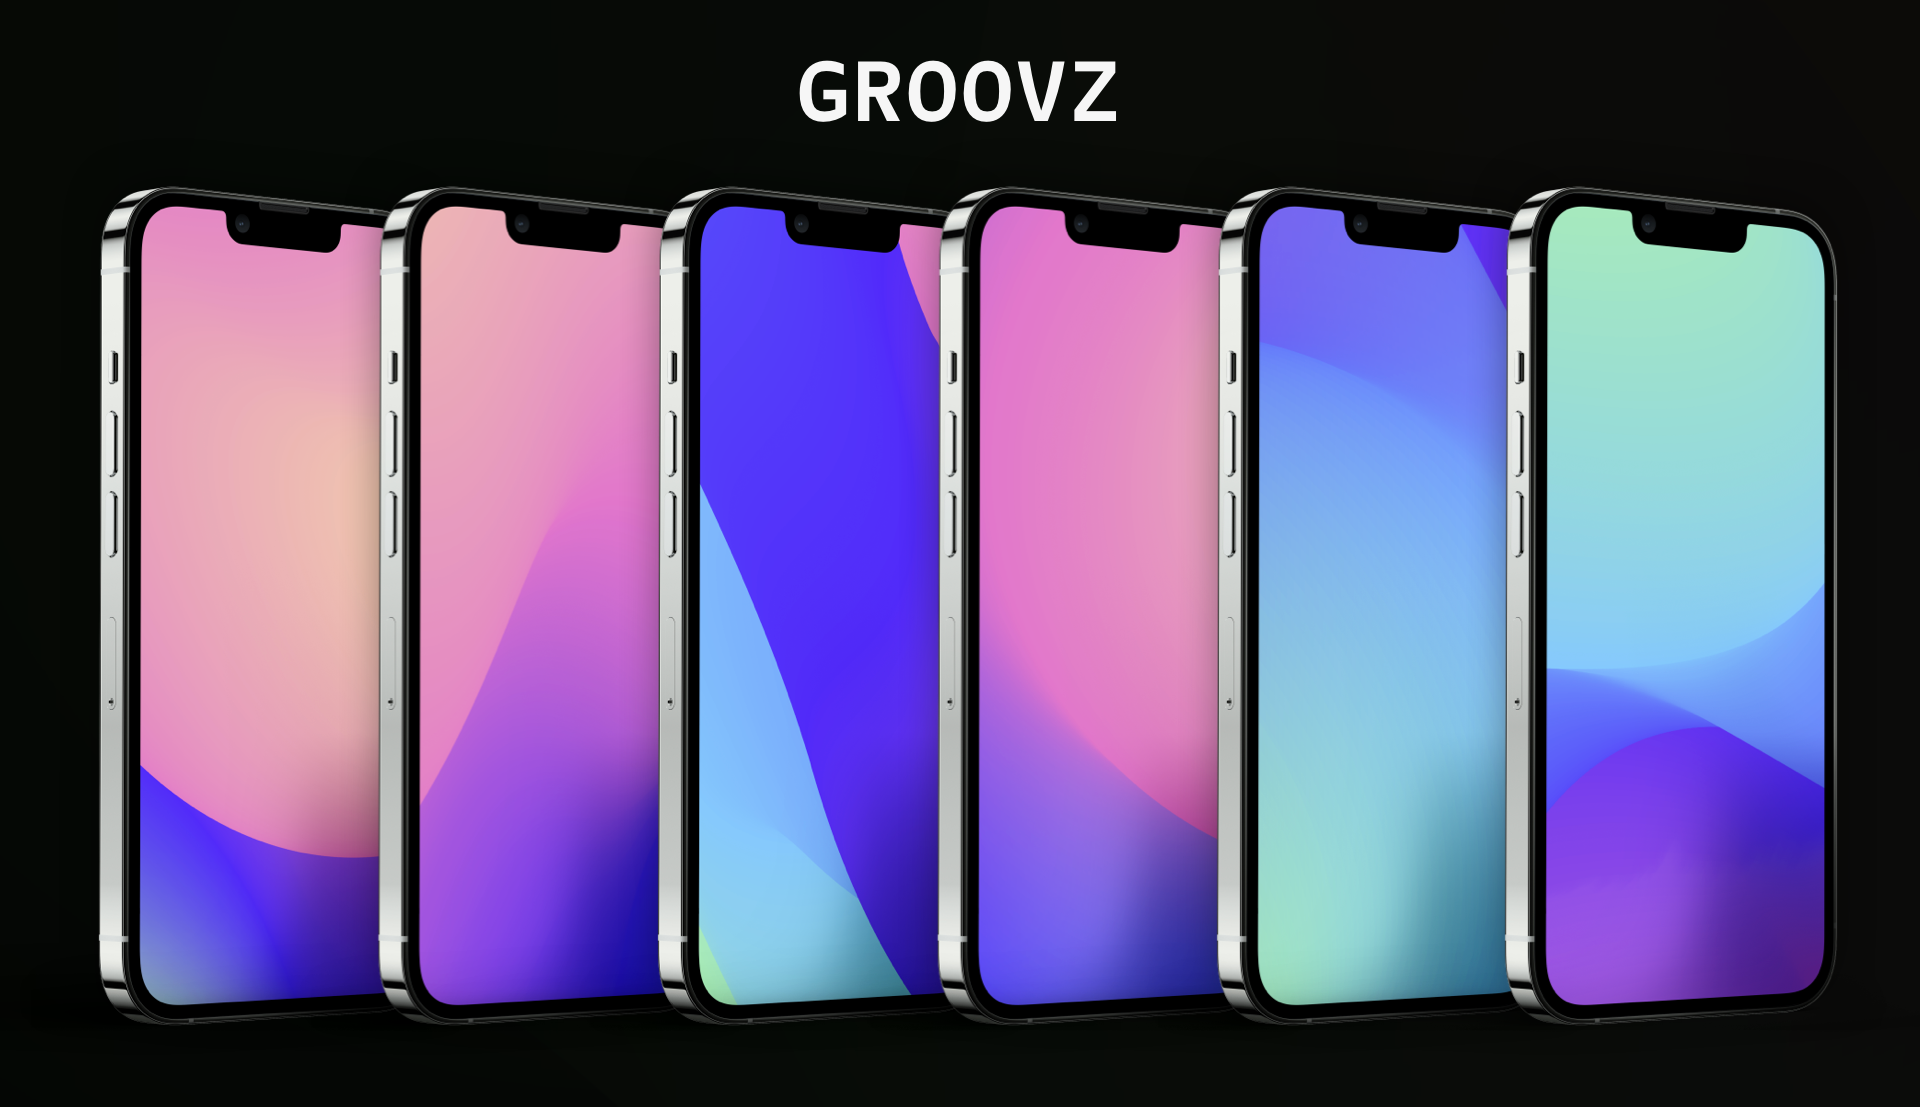 Groovz: Groovy Walls for Your Phone